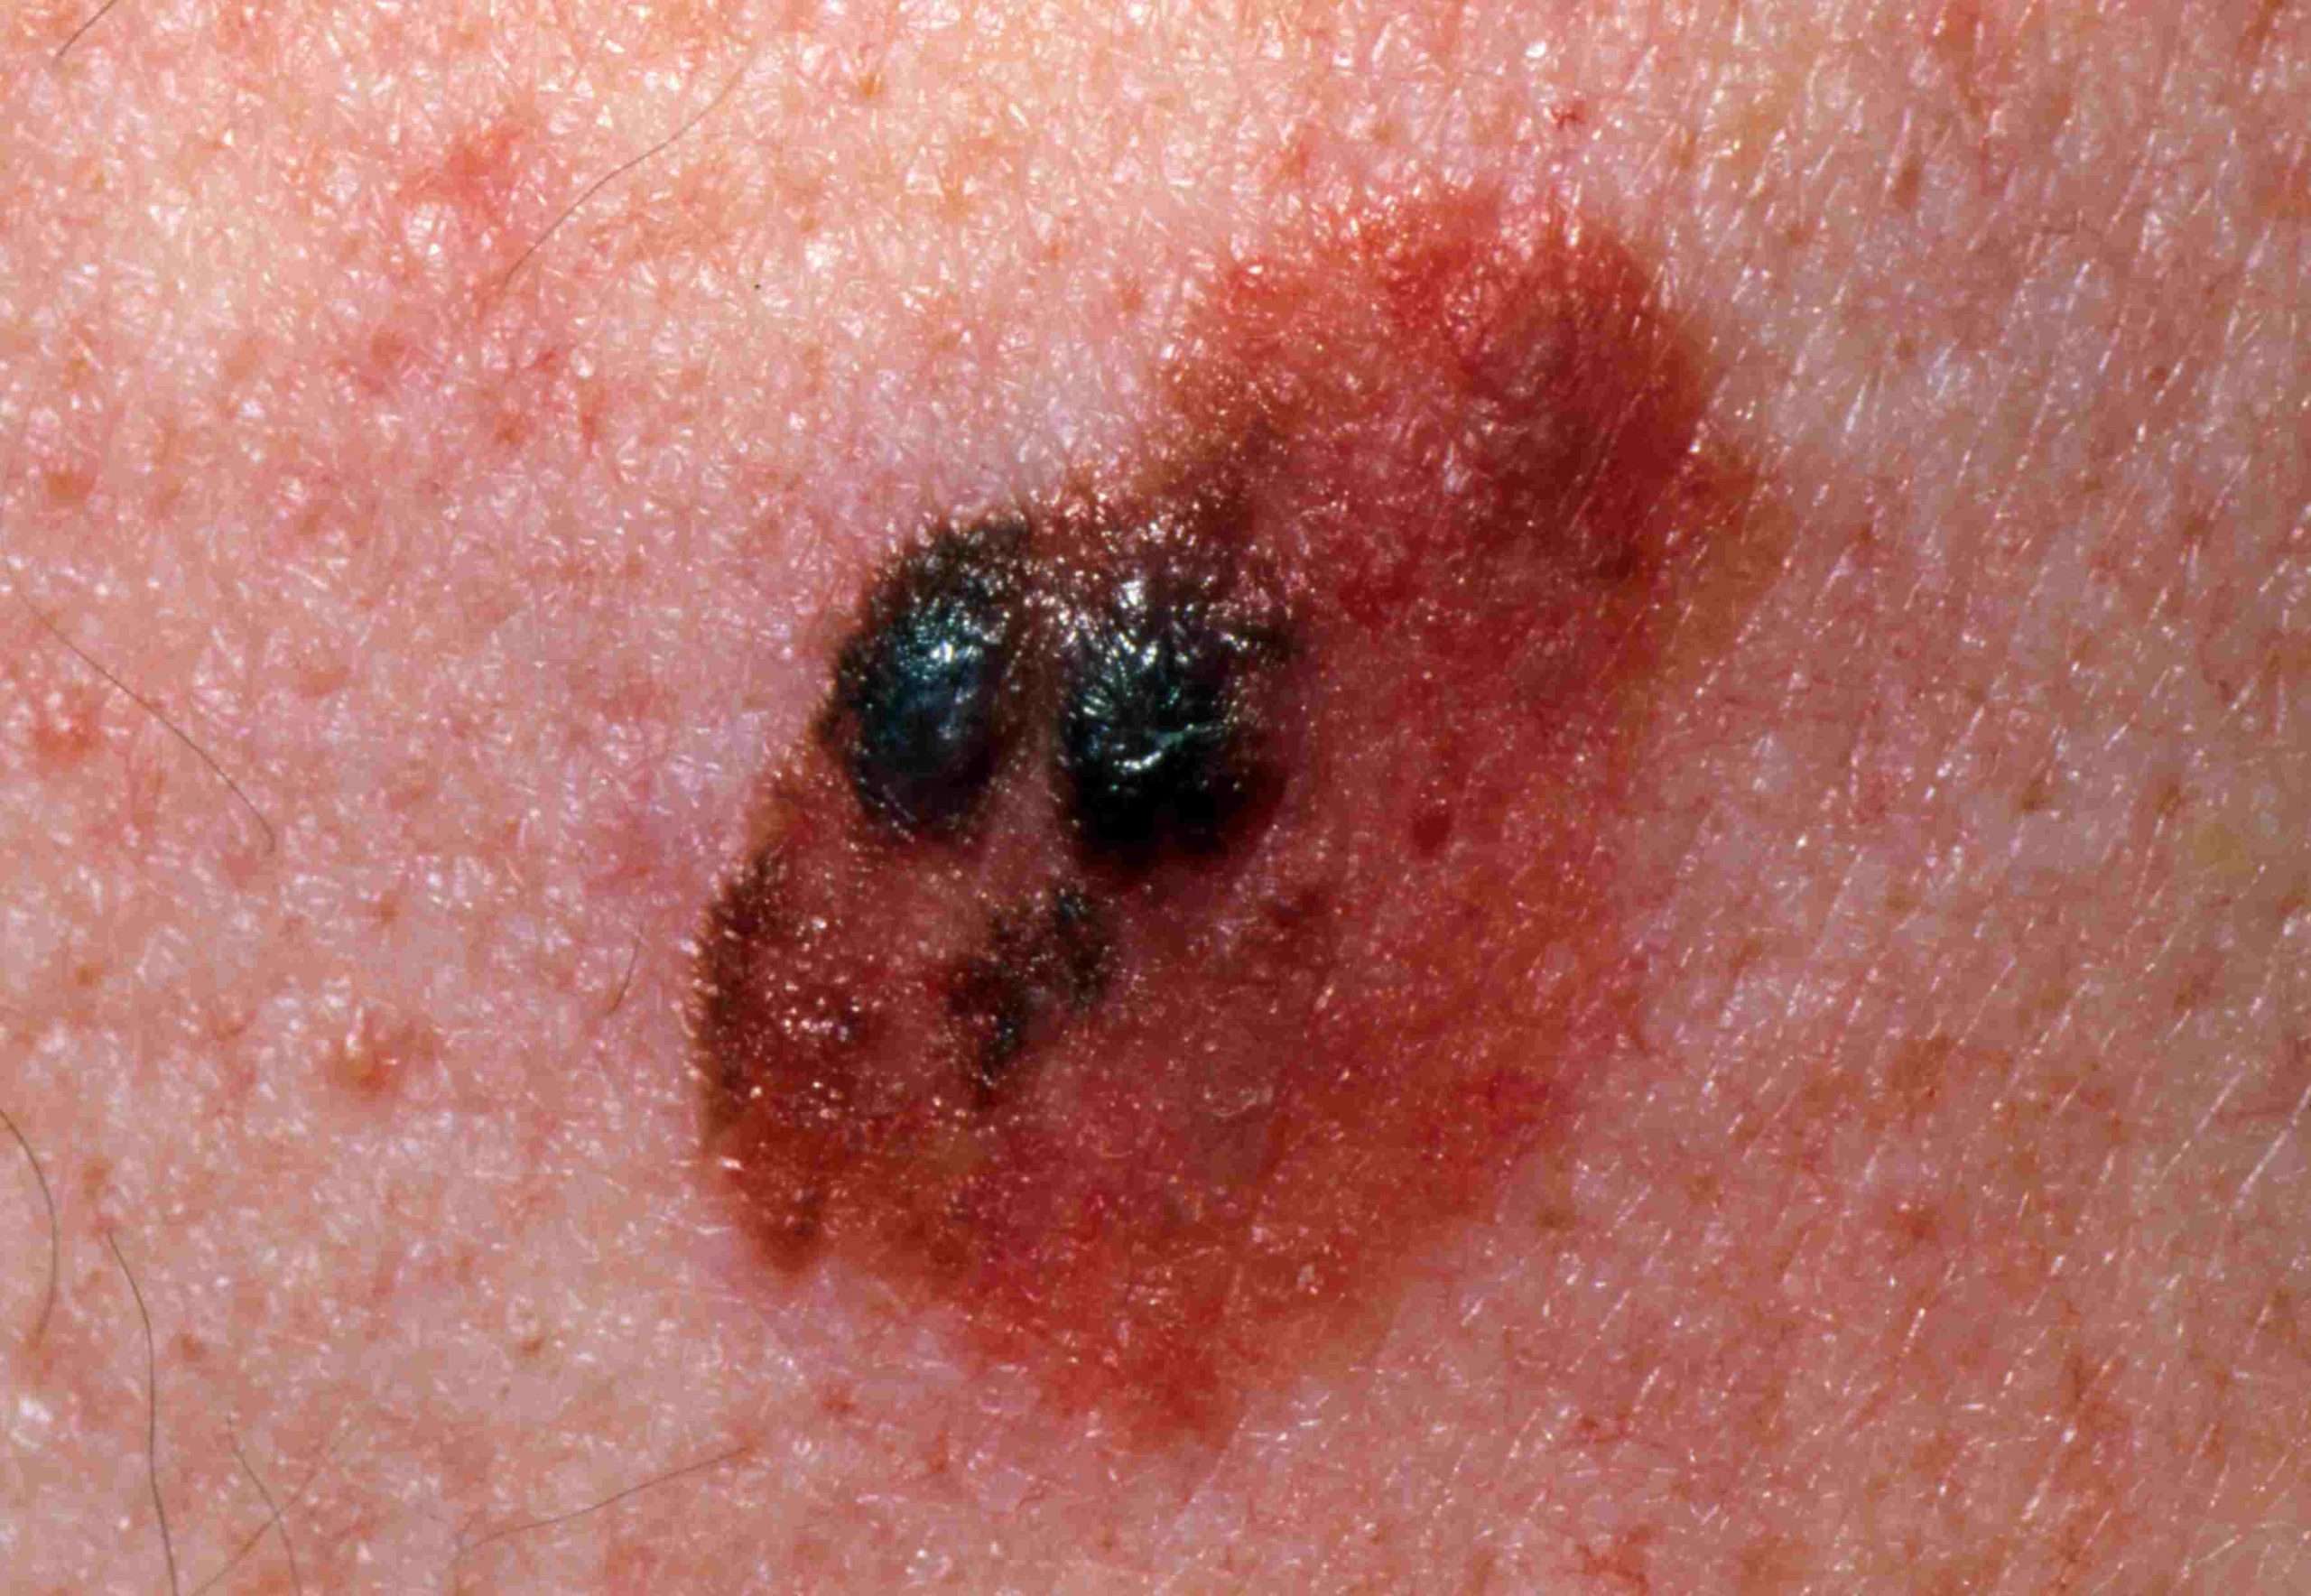 Spot the Differences Between a Mole and Skin Cancer